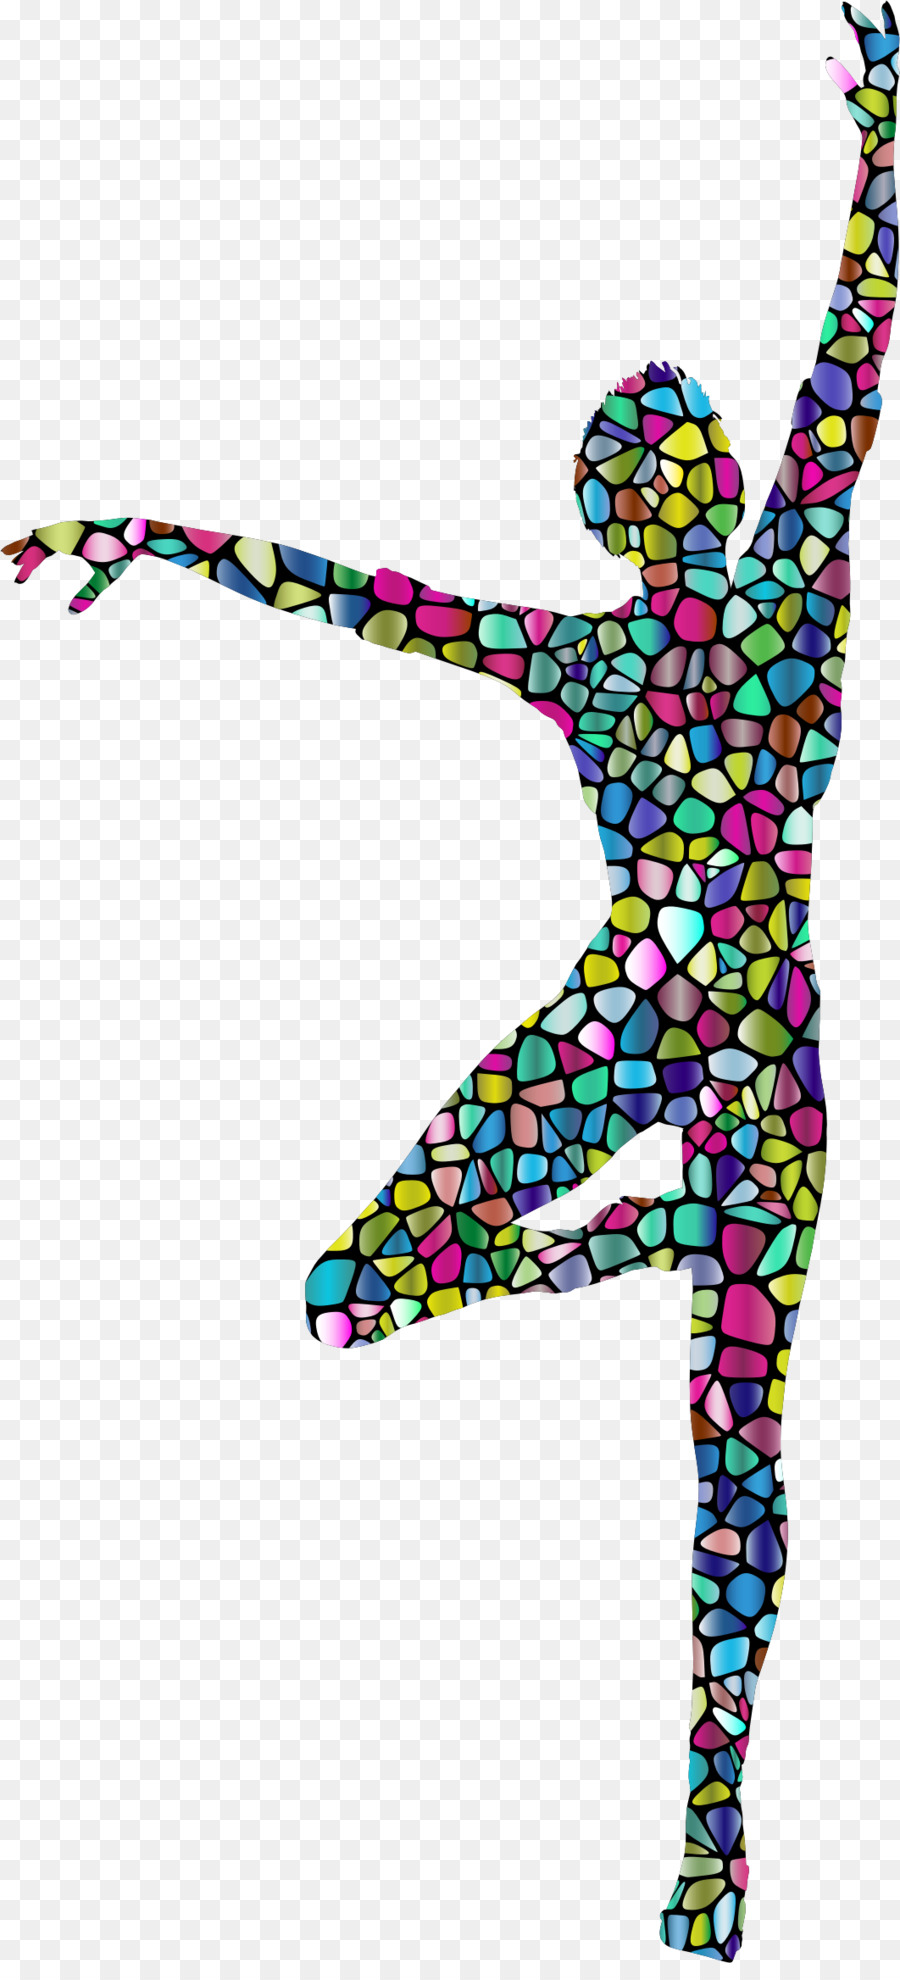 Dance Dancing Female Silhouette Photography - dancing png download - 1062*2316 - Free Transparent Dance png Download.